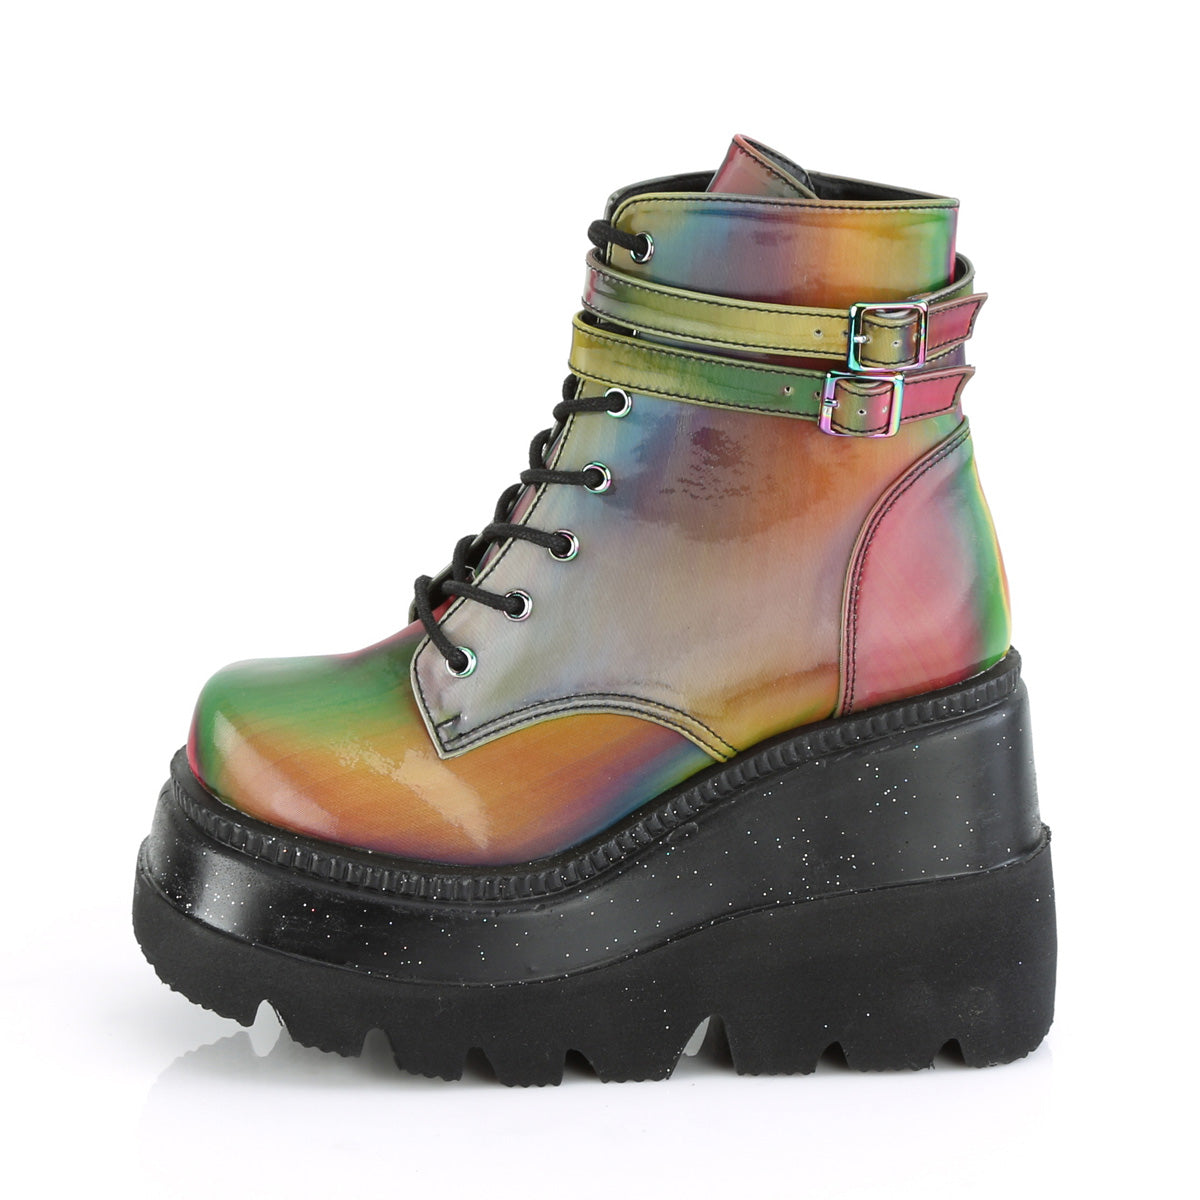 DemoniaCult Womens Ankle Boots SHAKER-52 Rainbow Reflective